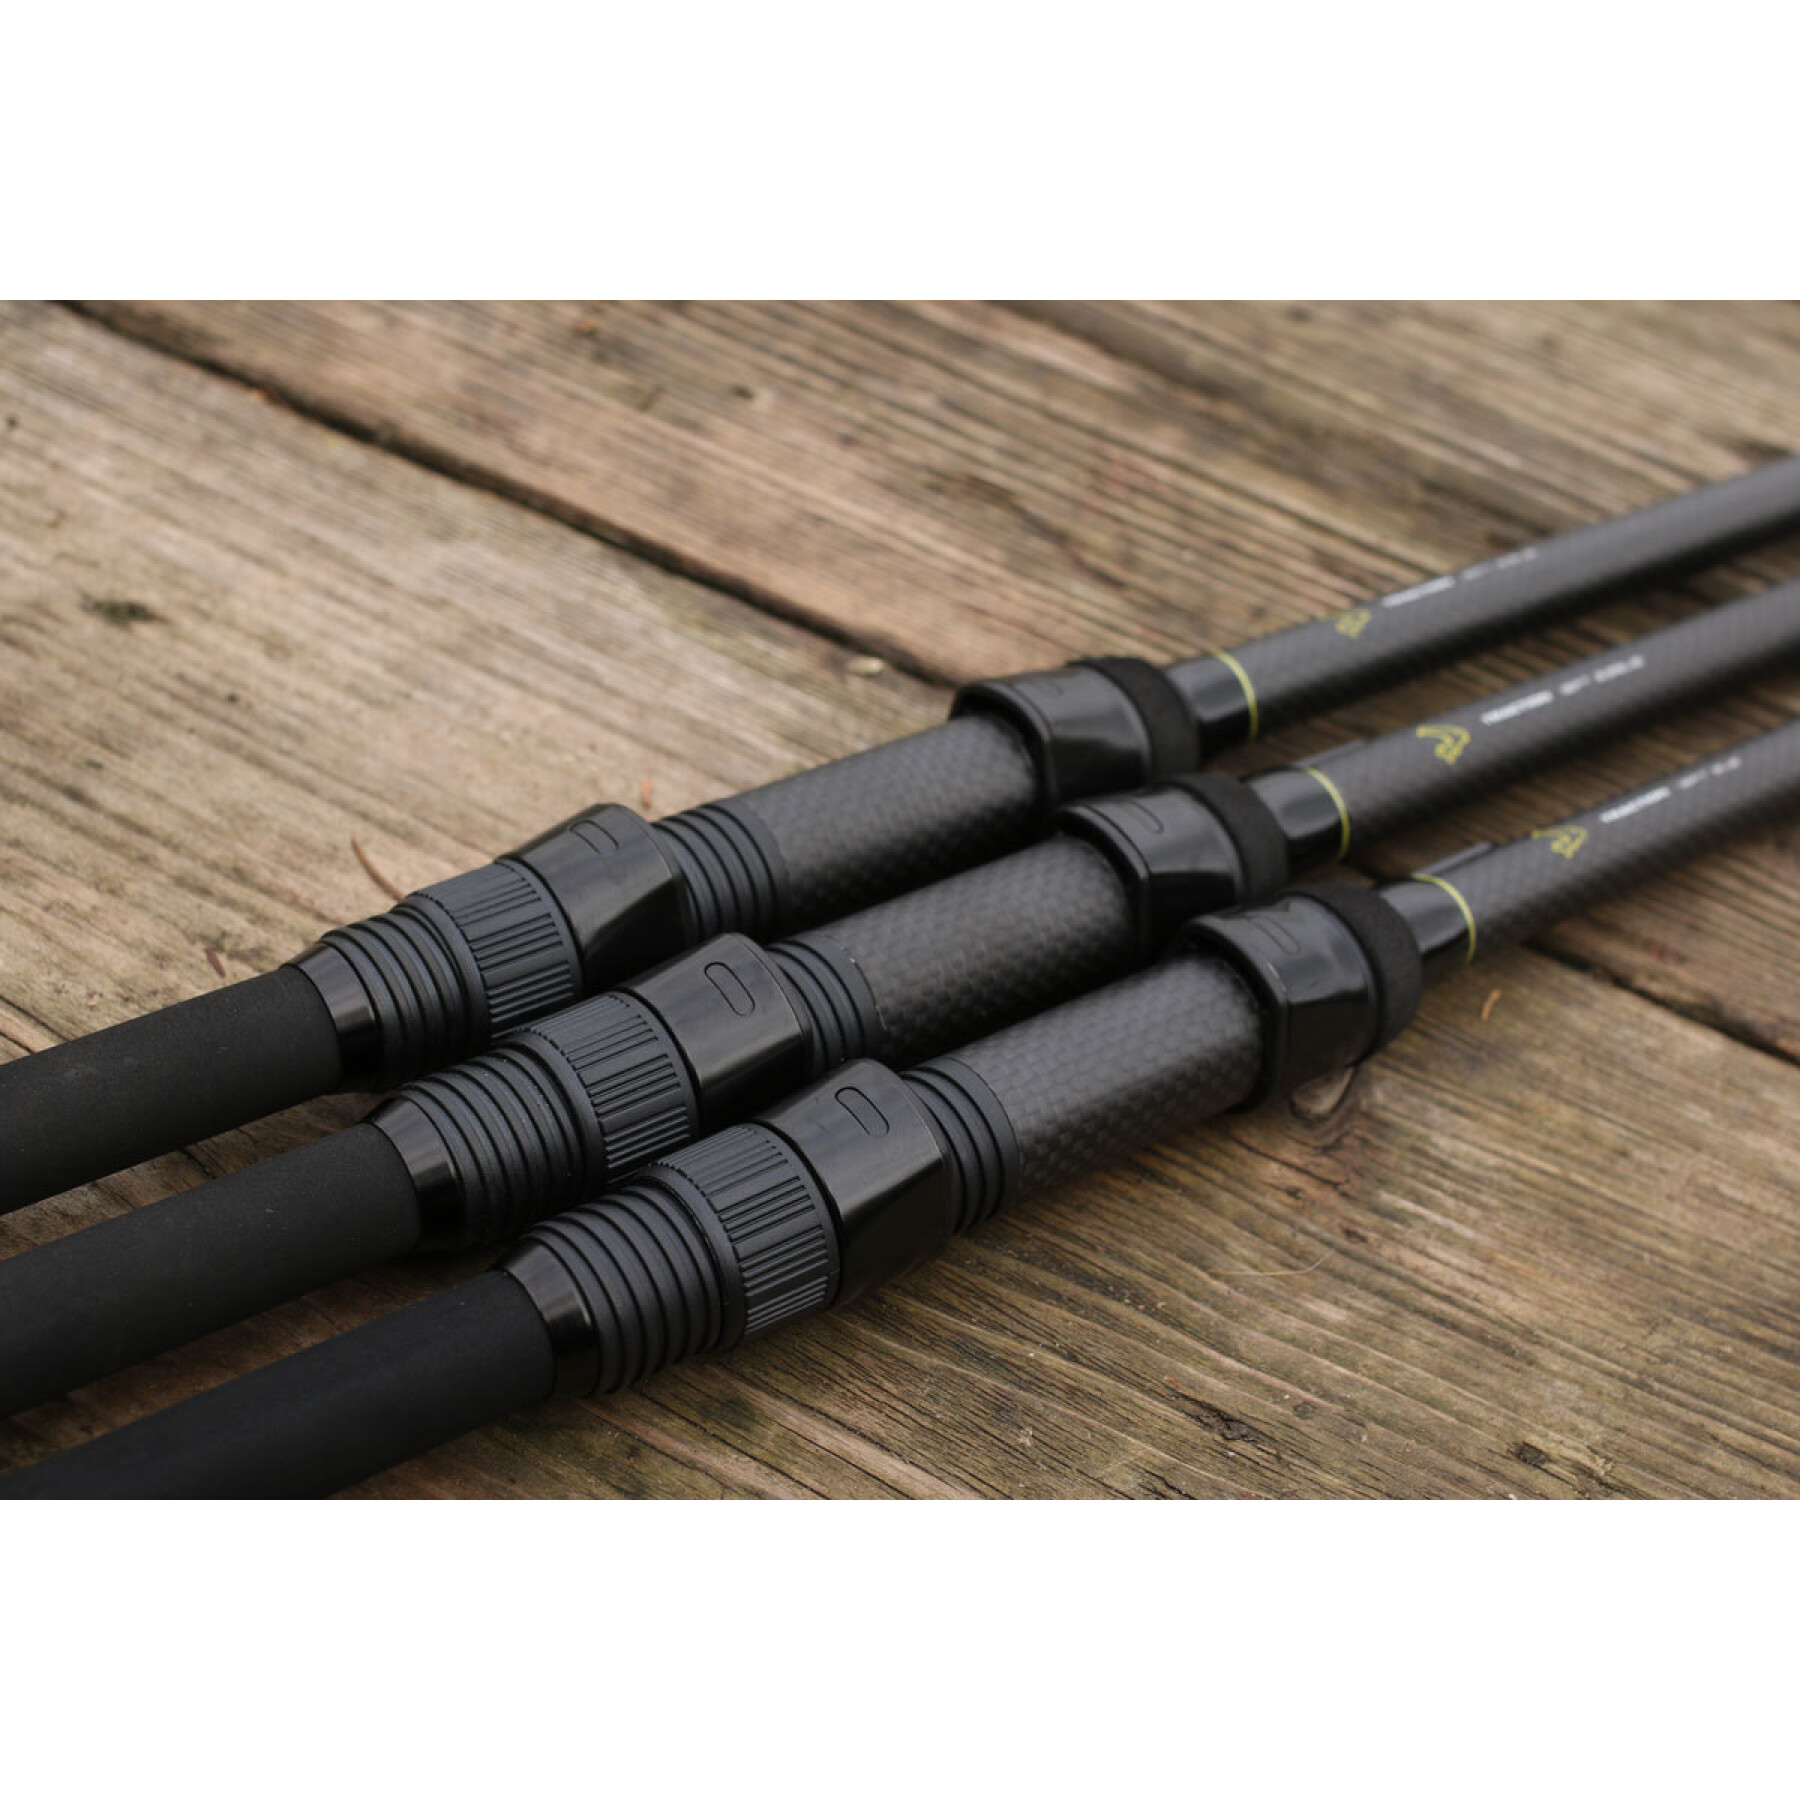 Tiges Avid Traction CT rod 12ft 2.5lb